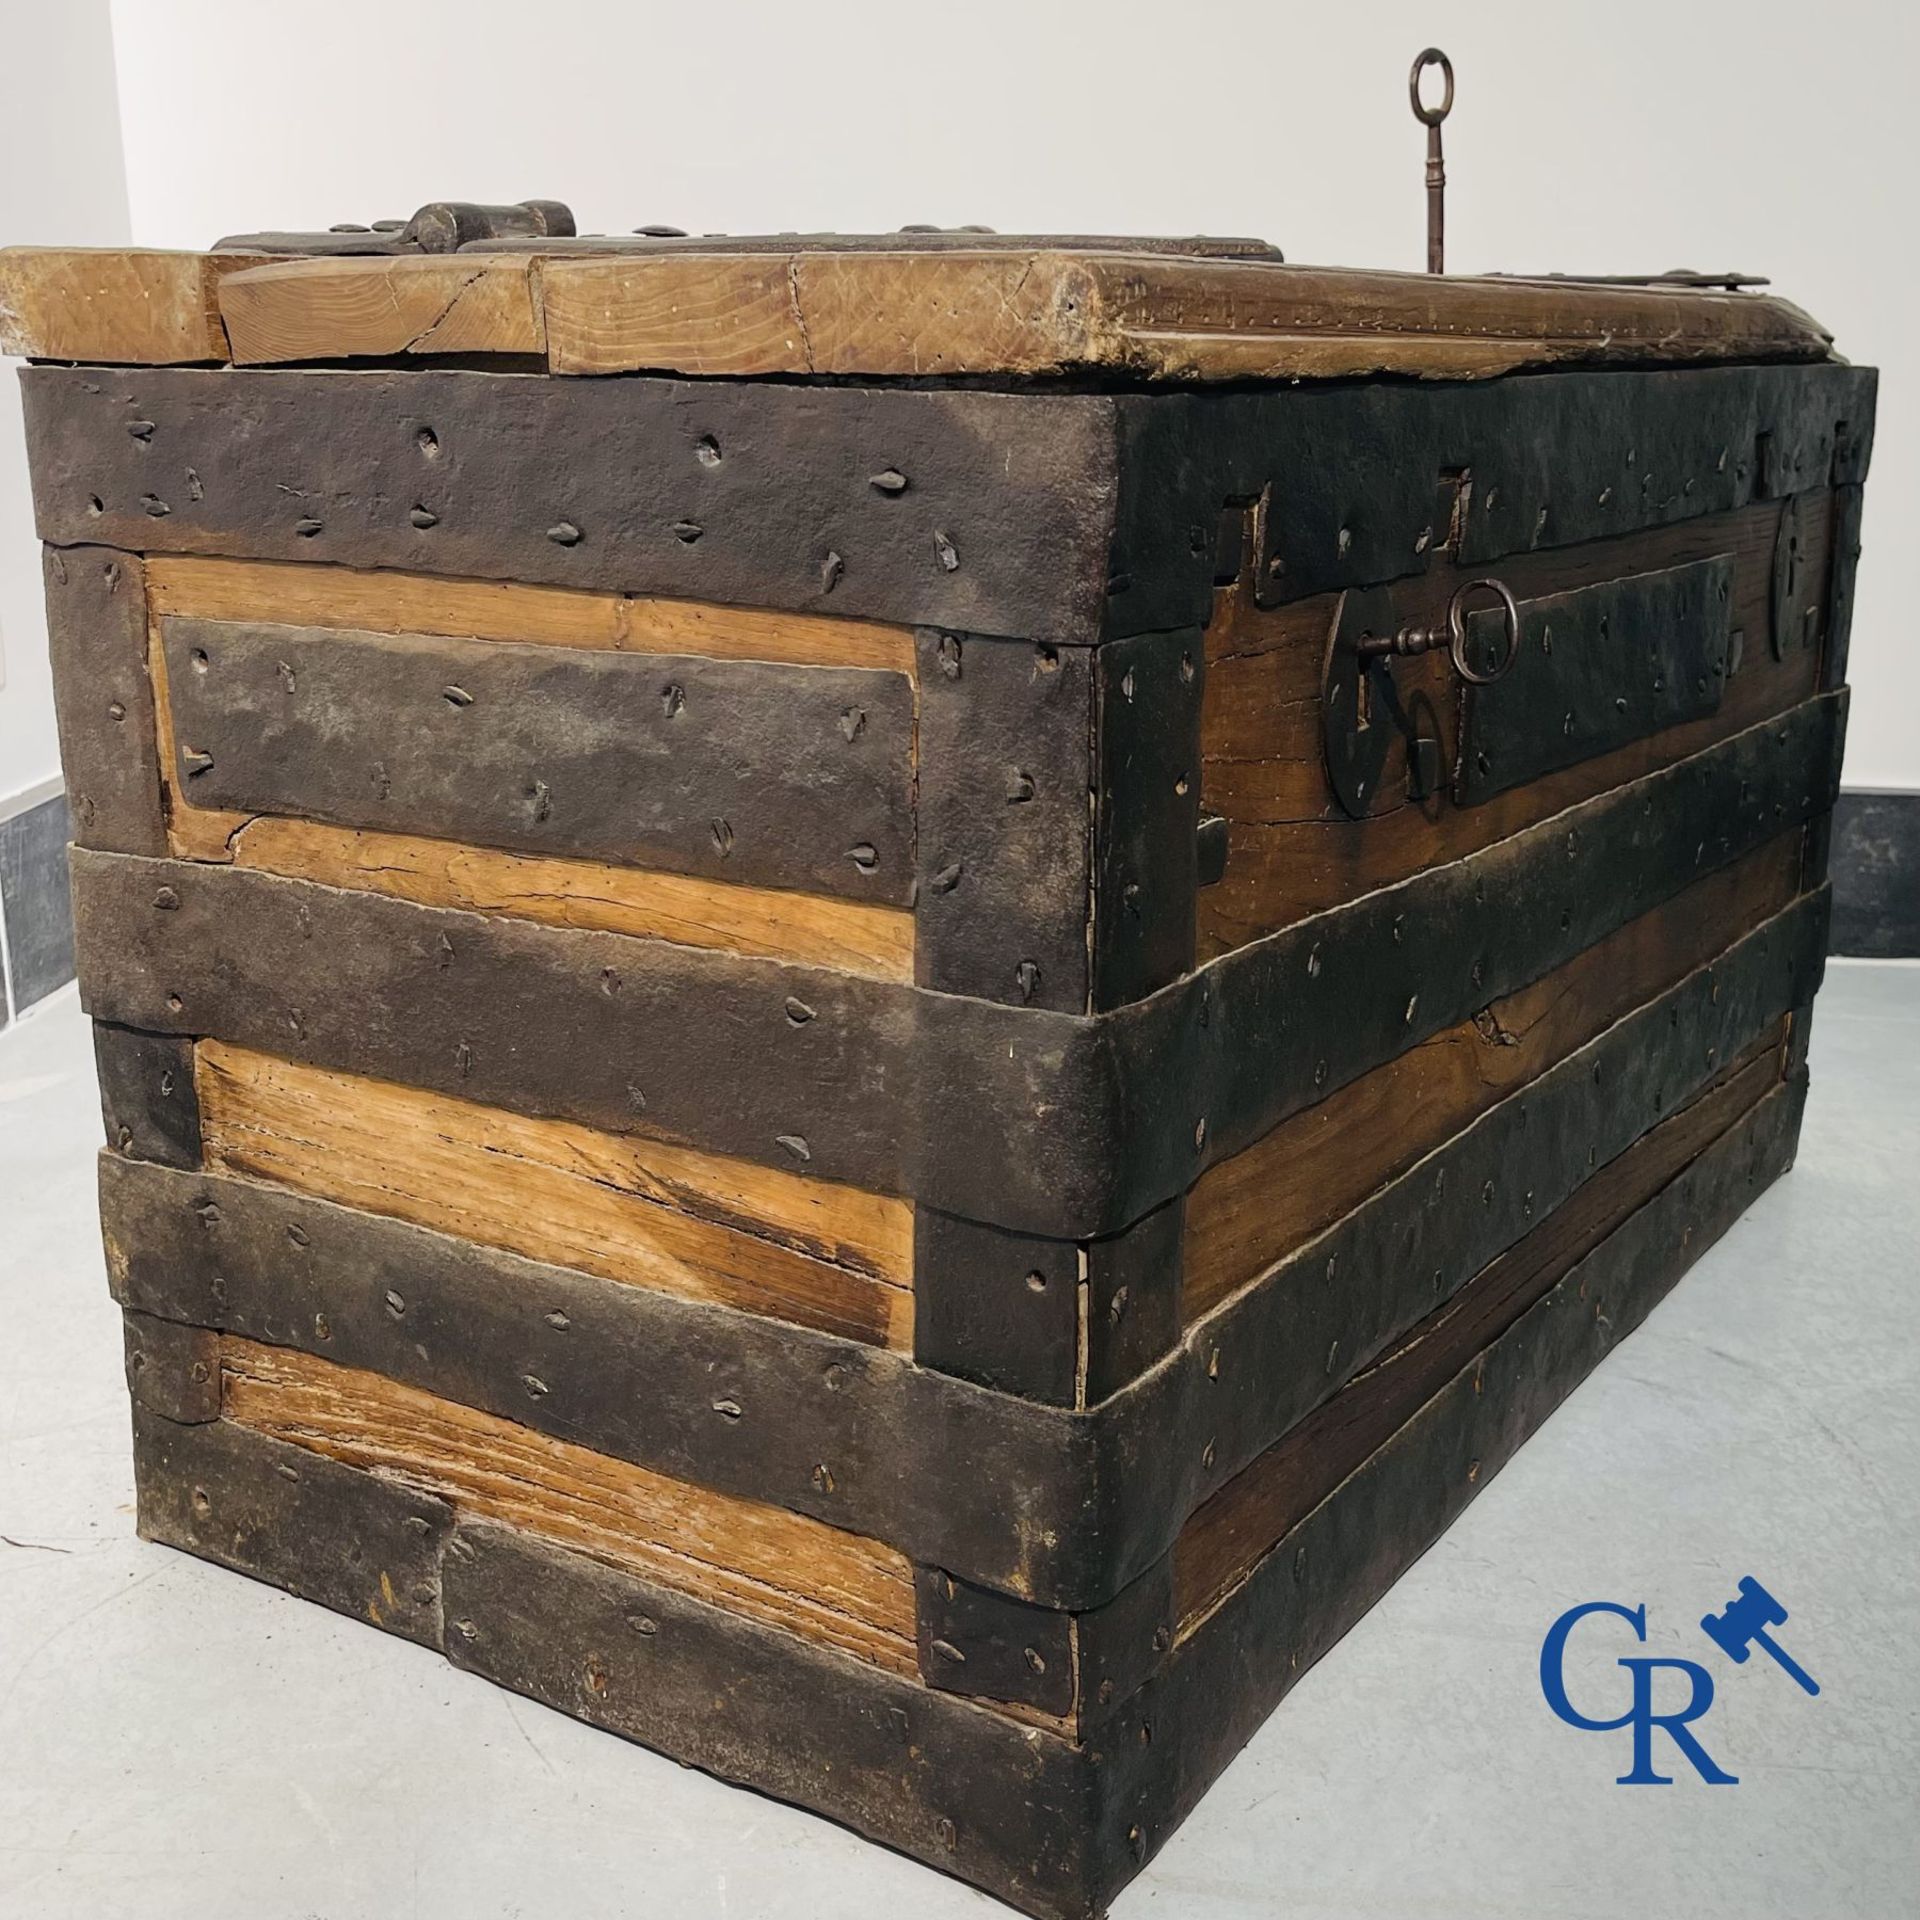 Antique wooden chest with hardware and lockwork in forging. - Image 9 of 21